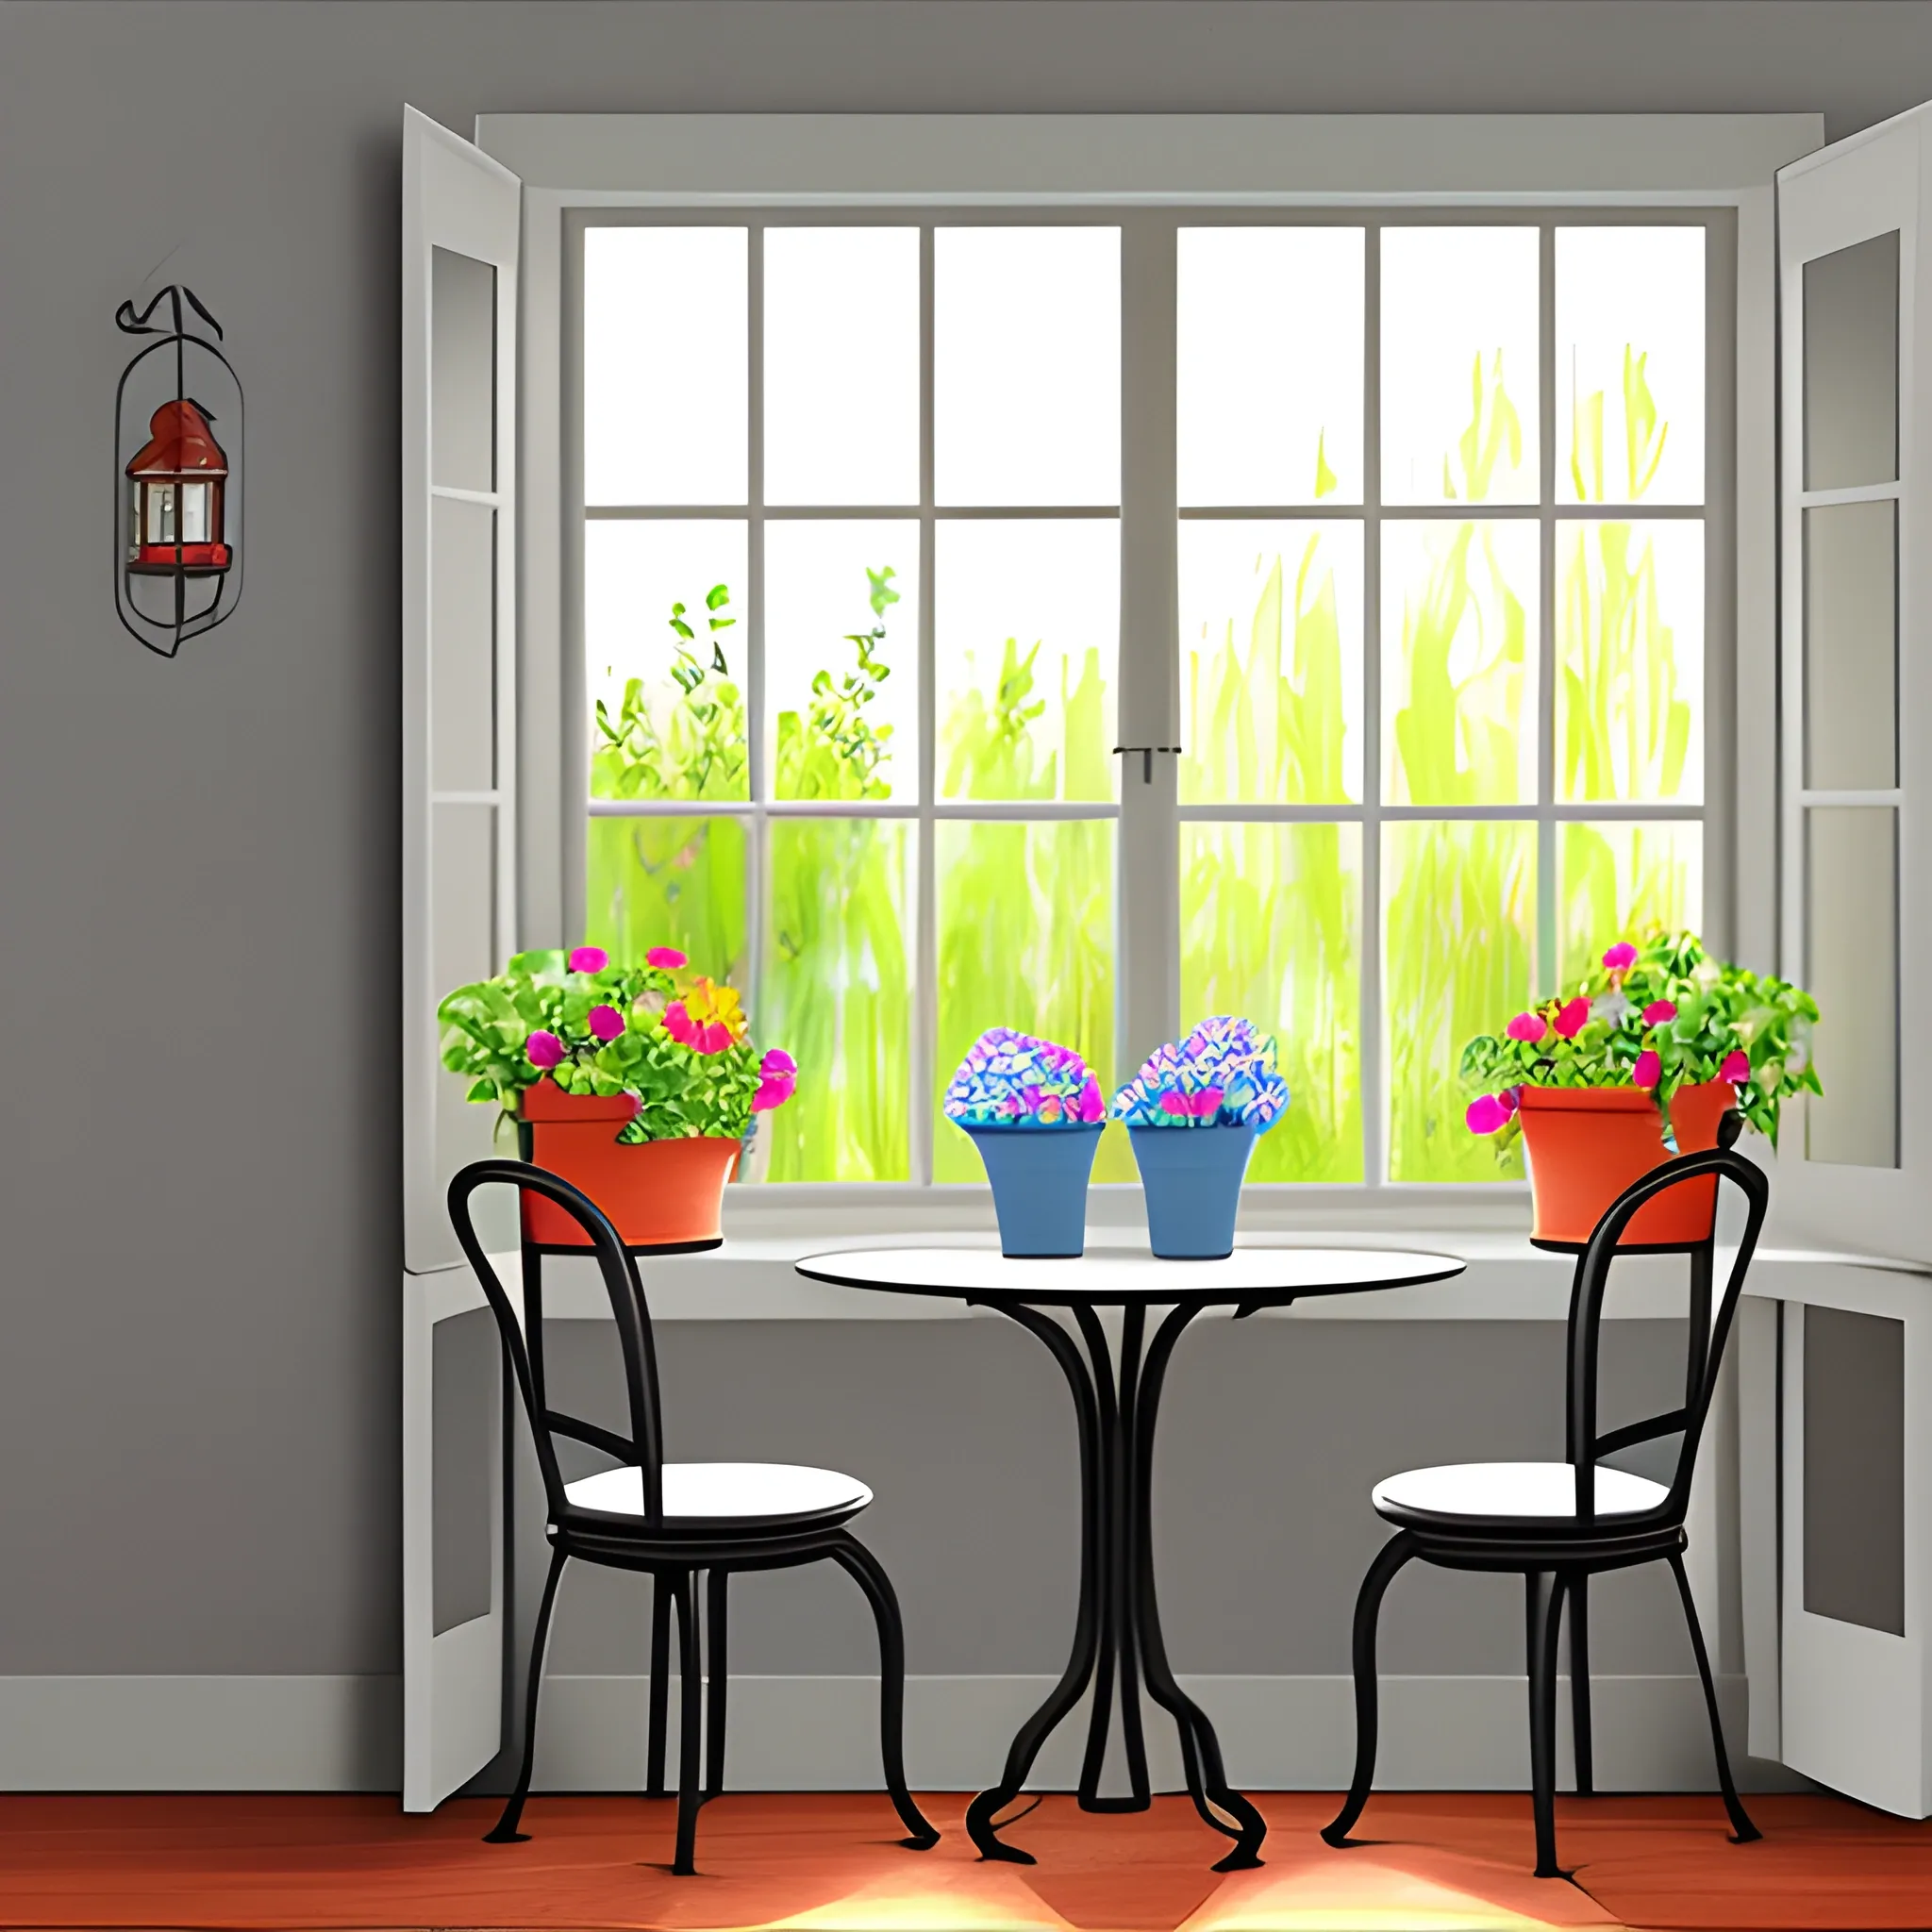 large window illustration, with table and chairs in the room with flower pots and flowers around, in digital painting style, with gray colors